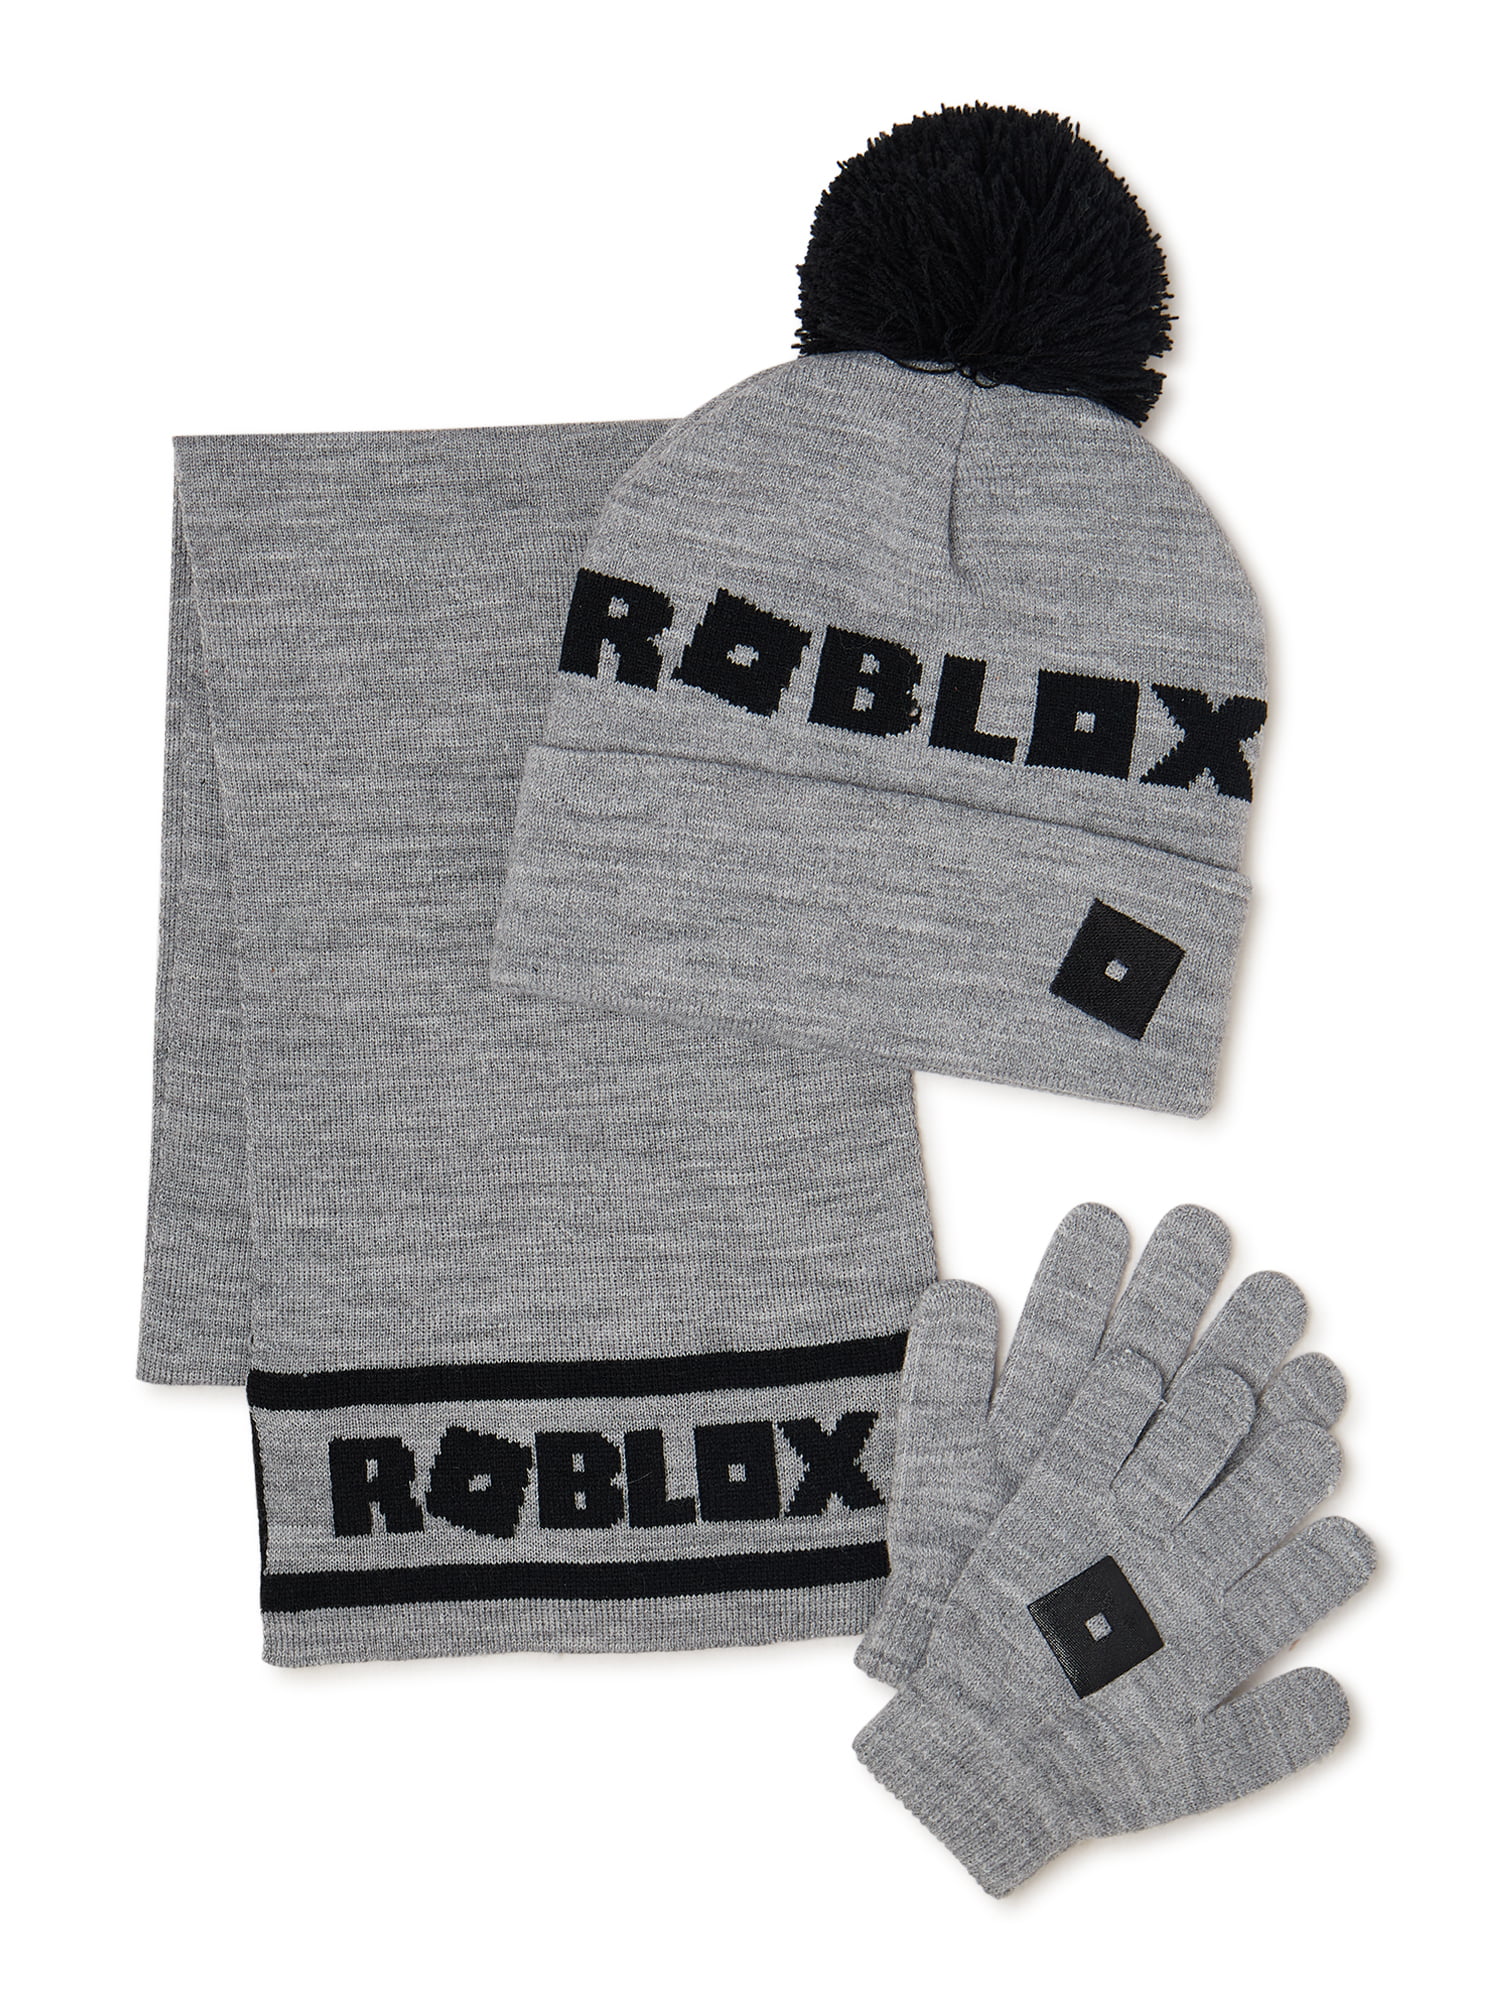 Roblox Boys Cold Weather Hat, Gloves and Scarf Set, 3-Piece - Walmart.com